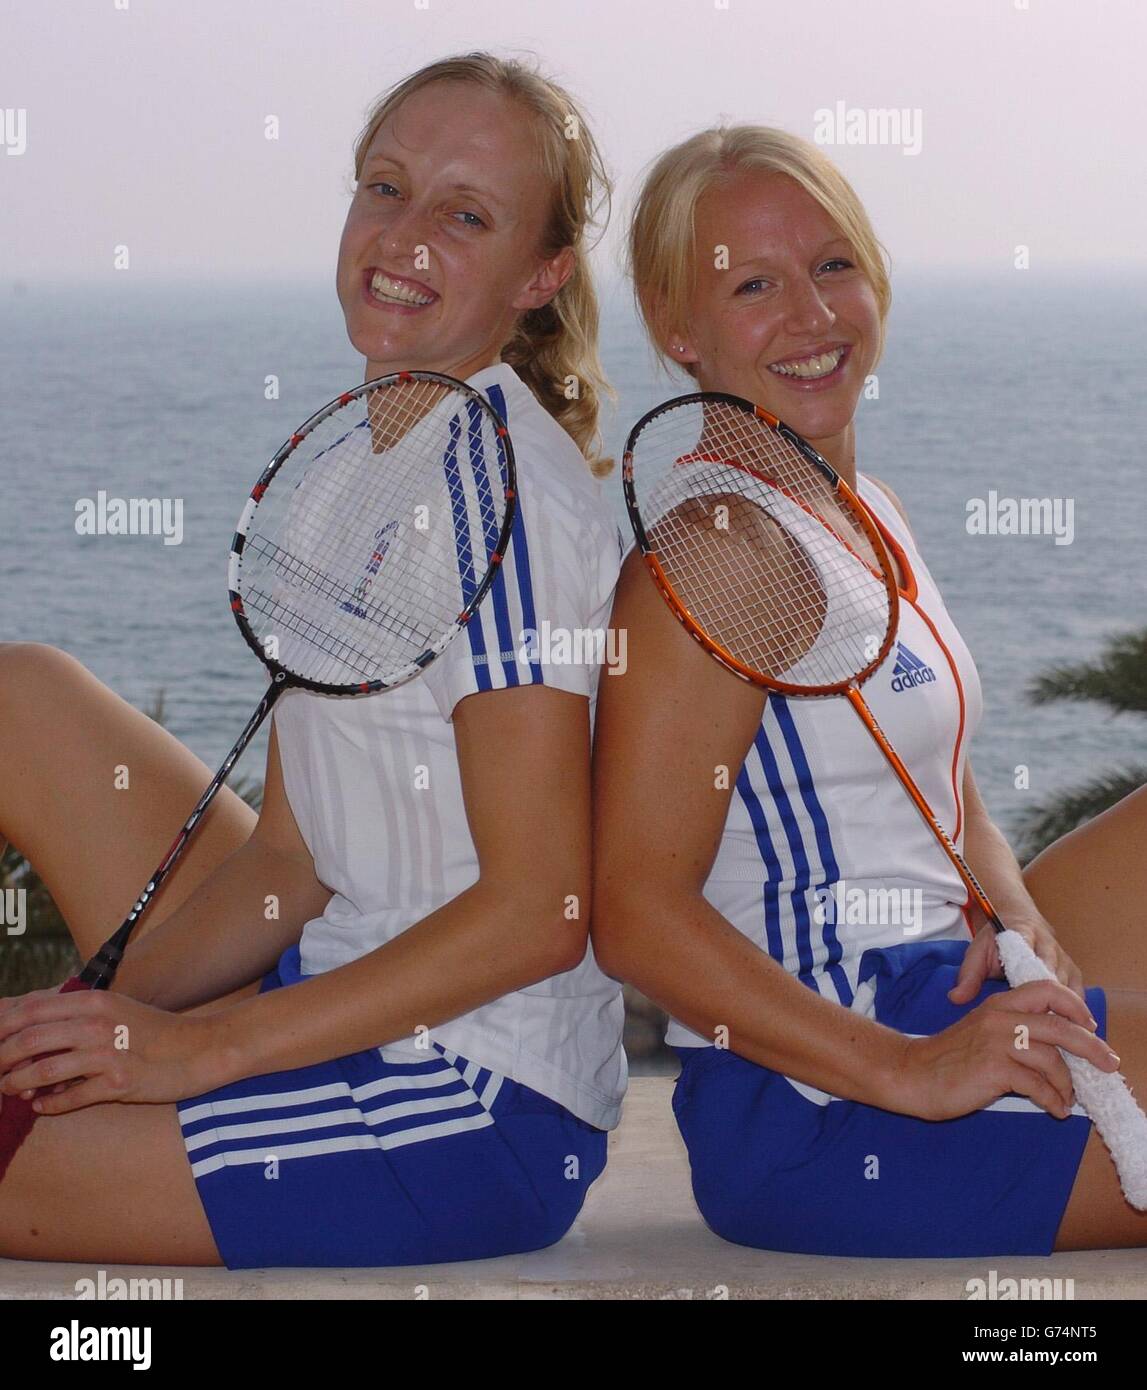 Gail Emms (right) from Bedford and Donna Kellogg from Derby, member's of the British olympic Badminton team, in Coral Beach Bay, the GB Olympic Holding Camp in Cyprus. Stock Photo